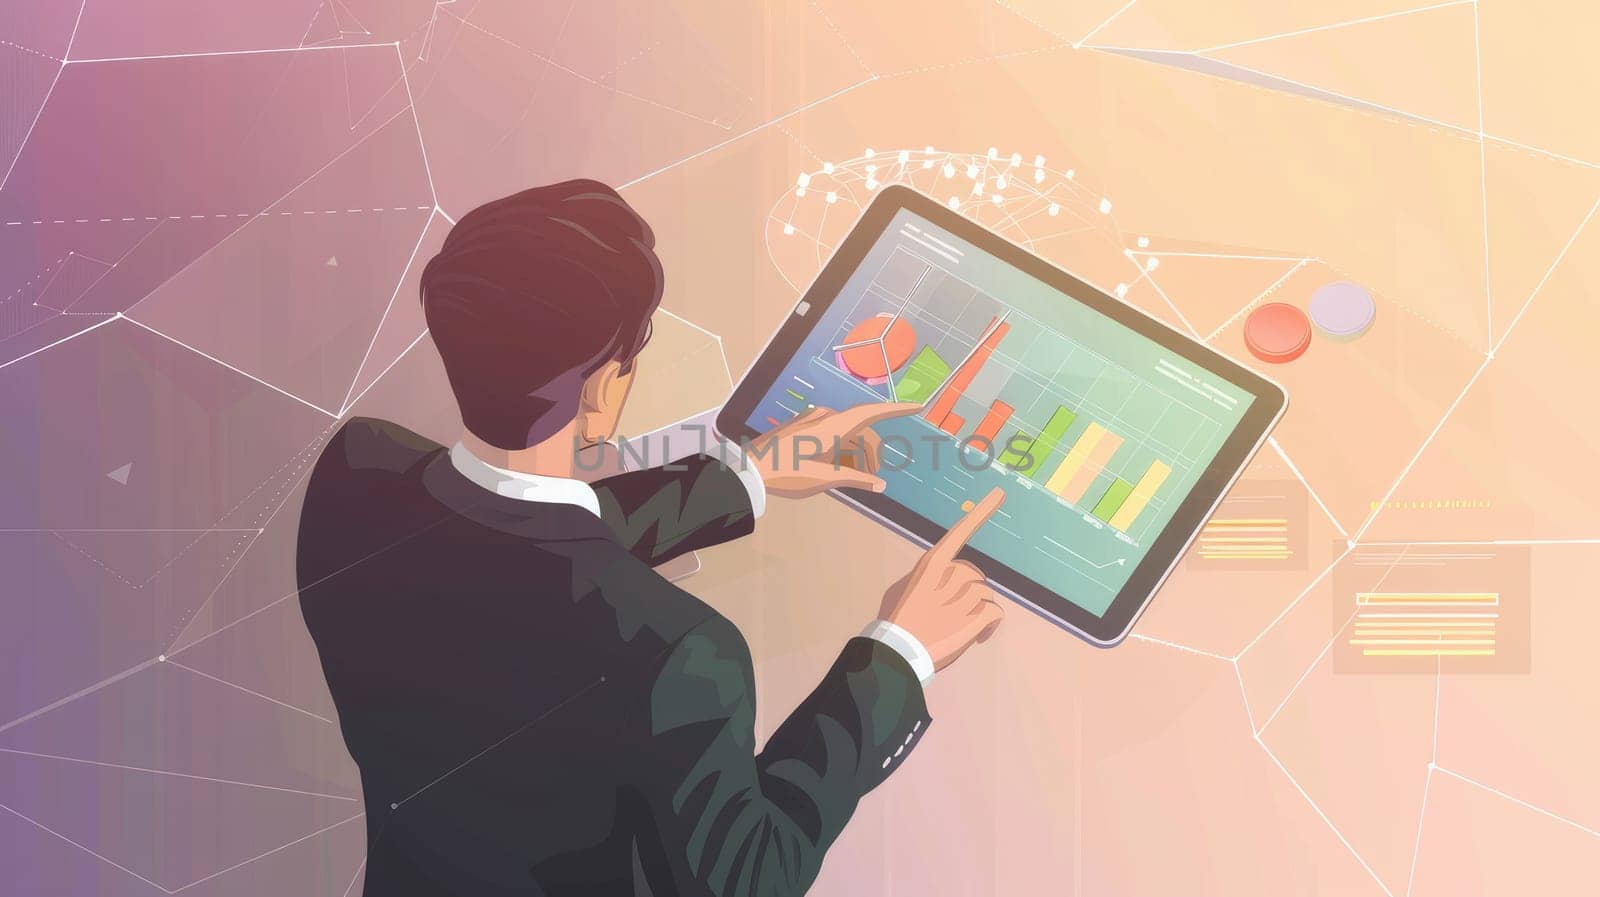 The Future of Finance: Businessman Analyzing Financial Graphs on Digital Tablet - Isometric Illustration in Vibrant Colors with Copy Space for Decoration..